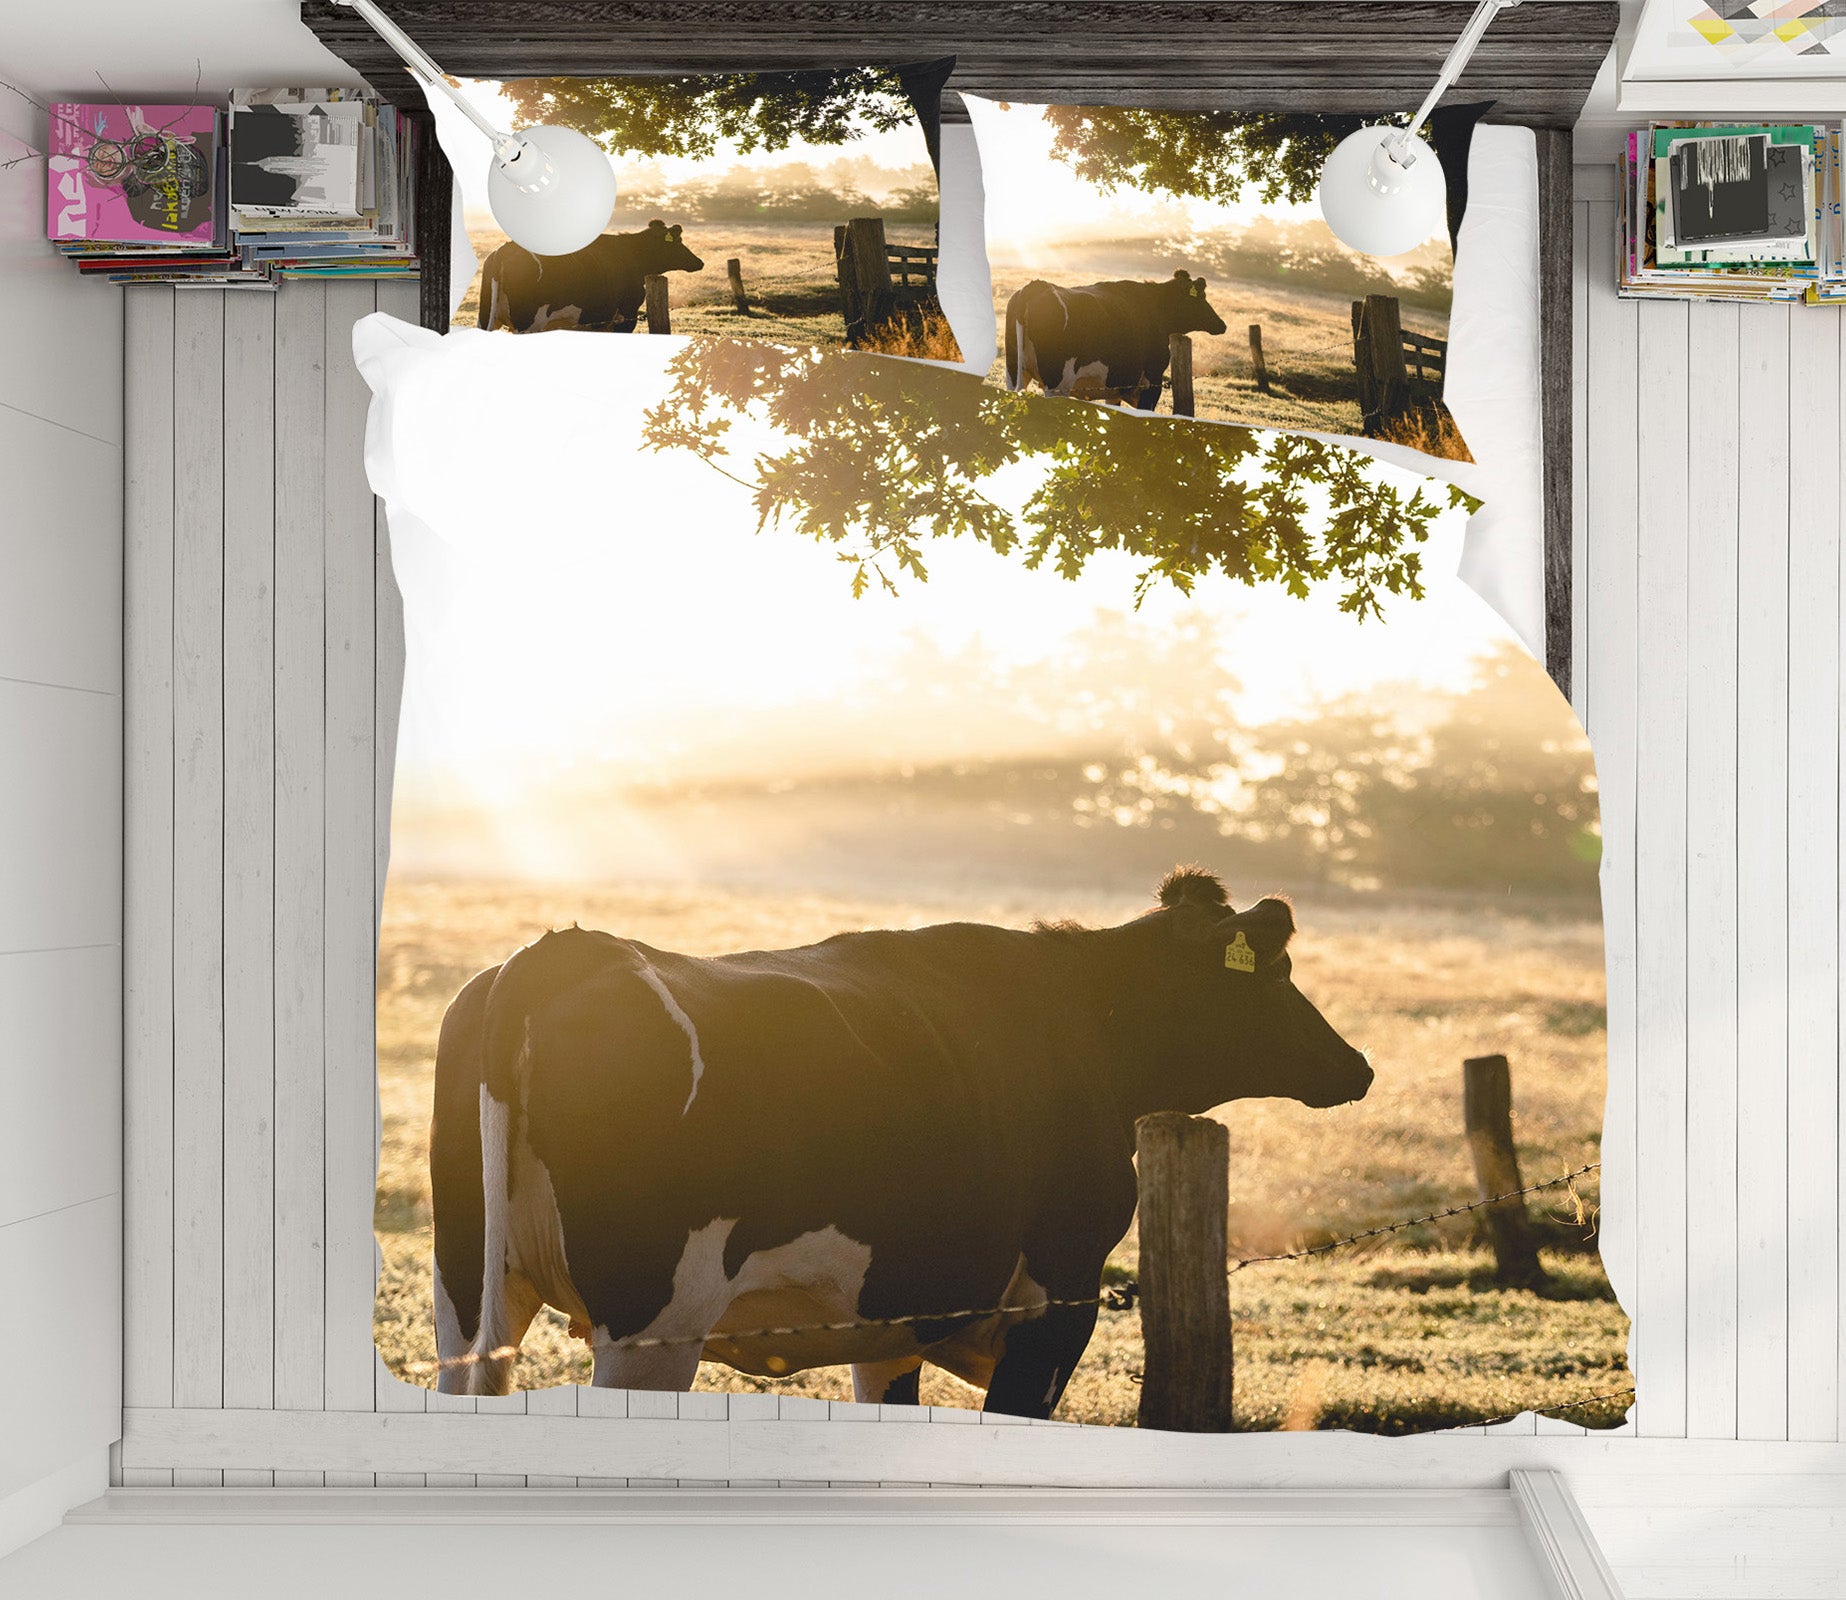 3D Cows 21047 Bed Pillowcases Quilt